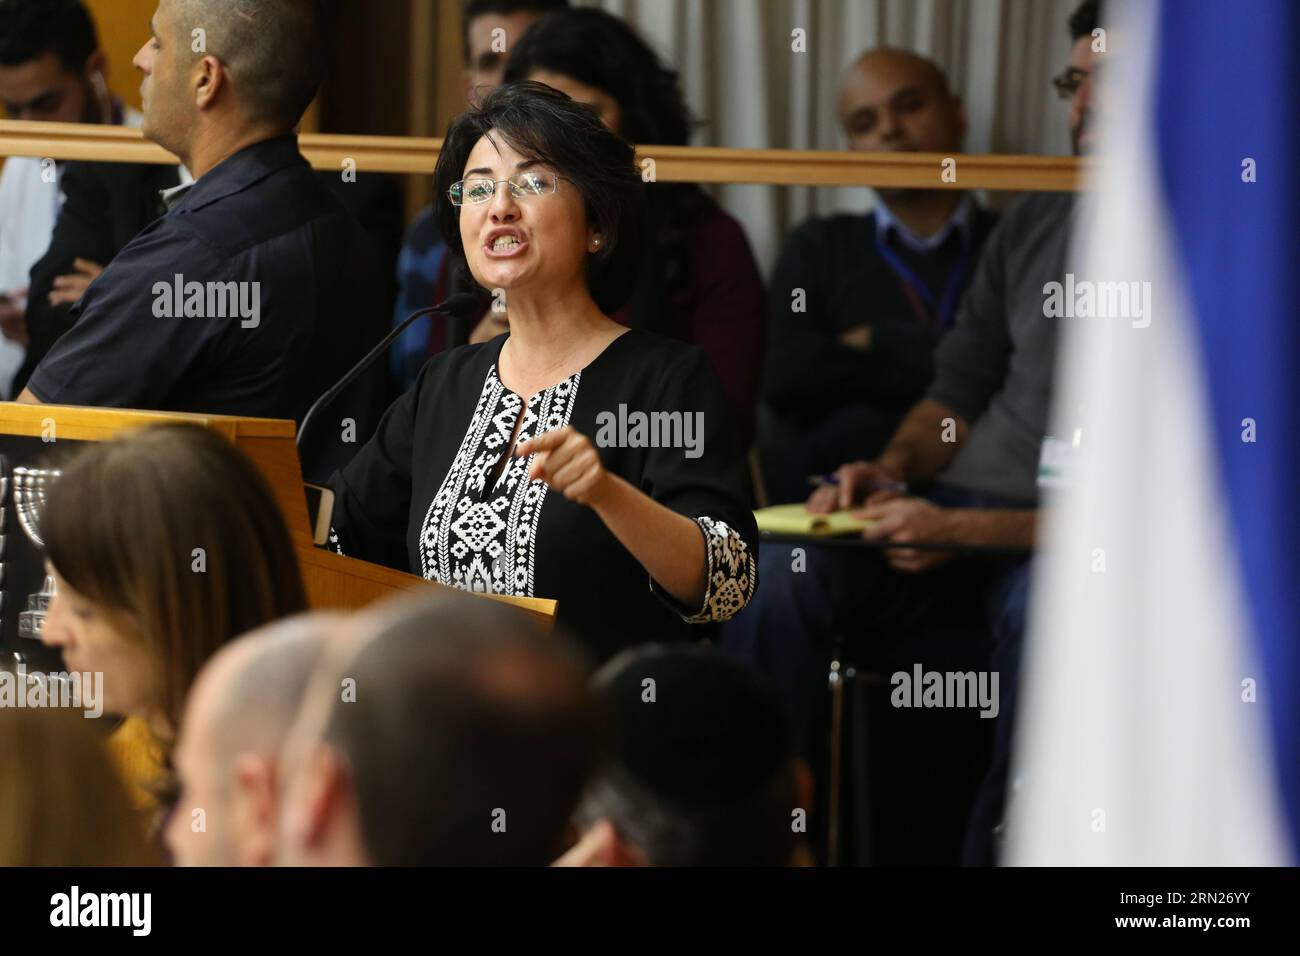 (150213) -- JERUSALEM, Feb. 12, 2015 -- Arab Israeli lawmaker Hanin Zoabi speaks during a vote to disqualify her from running for Knesset elections at the Israeli Central Elections Committee in the Israeli Knesset (parliament) in Jerusalem, on Feb. 12, 2015. The Israeli Central Elections Committee decided on Thursday to ban an Arab lawmaker and a far right-wing activist from running in the upcoming elections due to their controversial public remarks. ) MIDEAST-JERUSALEM-ISRAEL-KNESSET-ARAB LAWMAKER-FAR-RIGHTIST-ELECTION-BANNING JINI PUBLICATIONxNOTxINxCHN   Jerusalem Feb 12 2015 Arab Israeli l Stock Photo